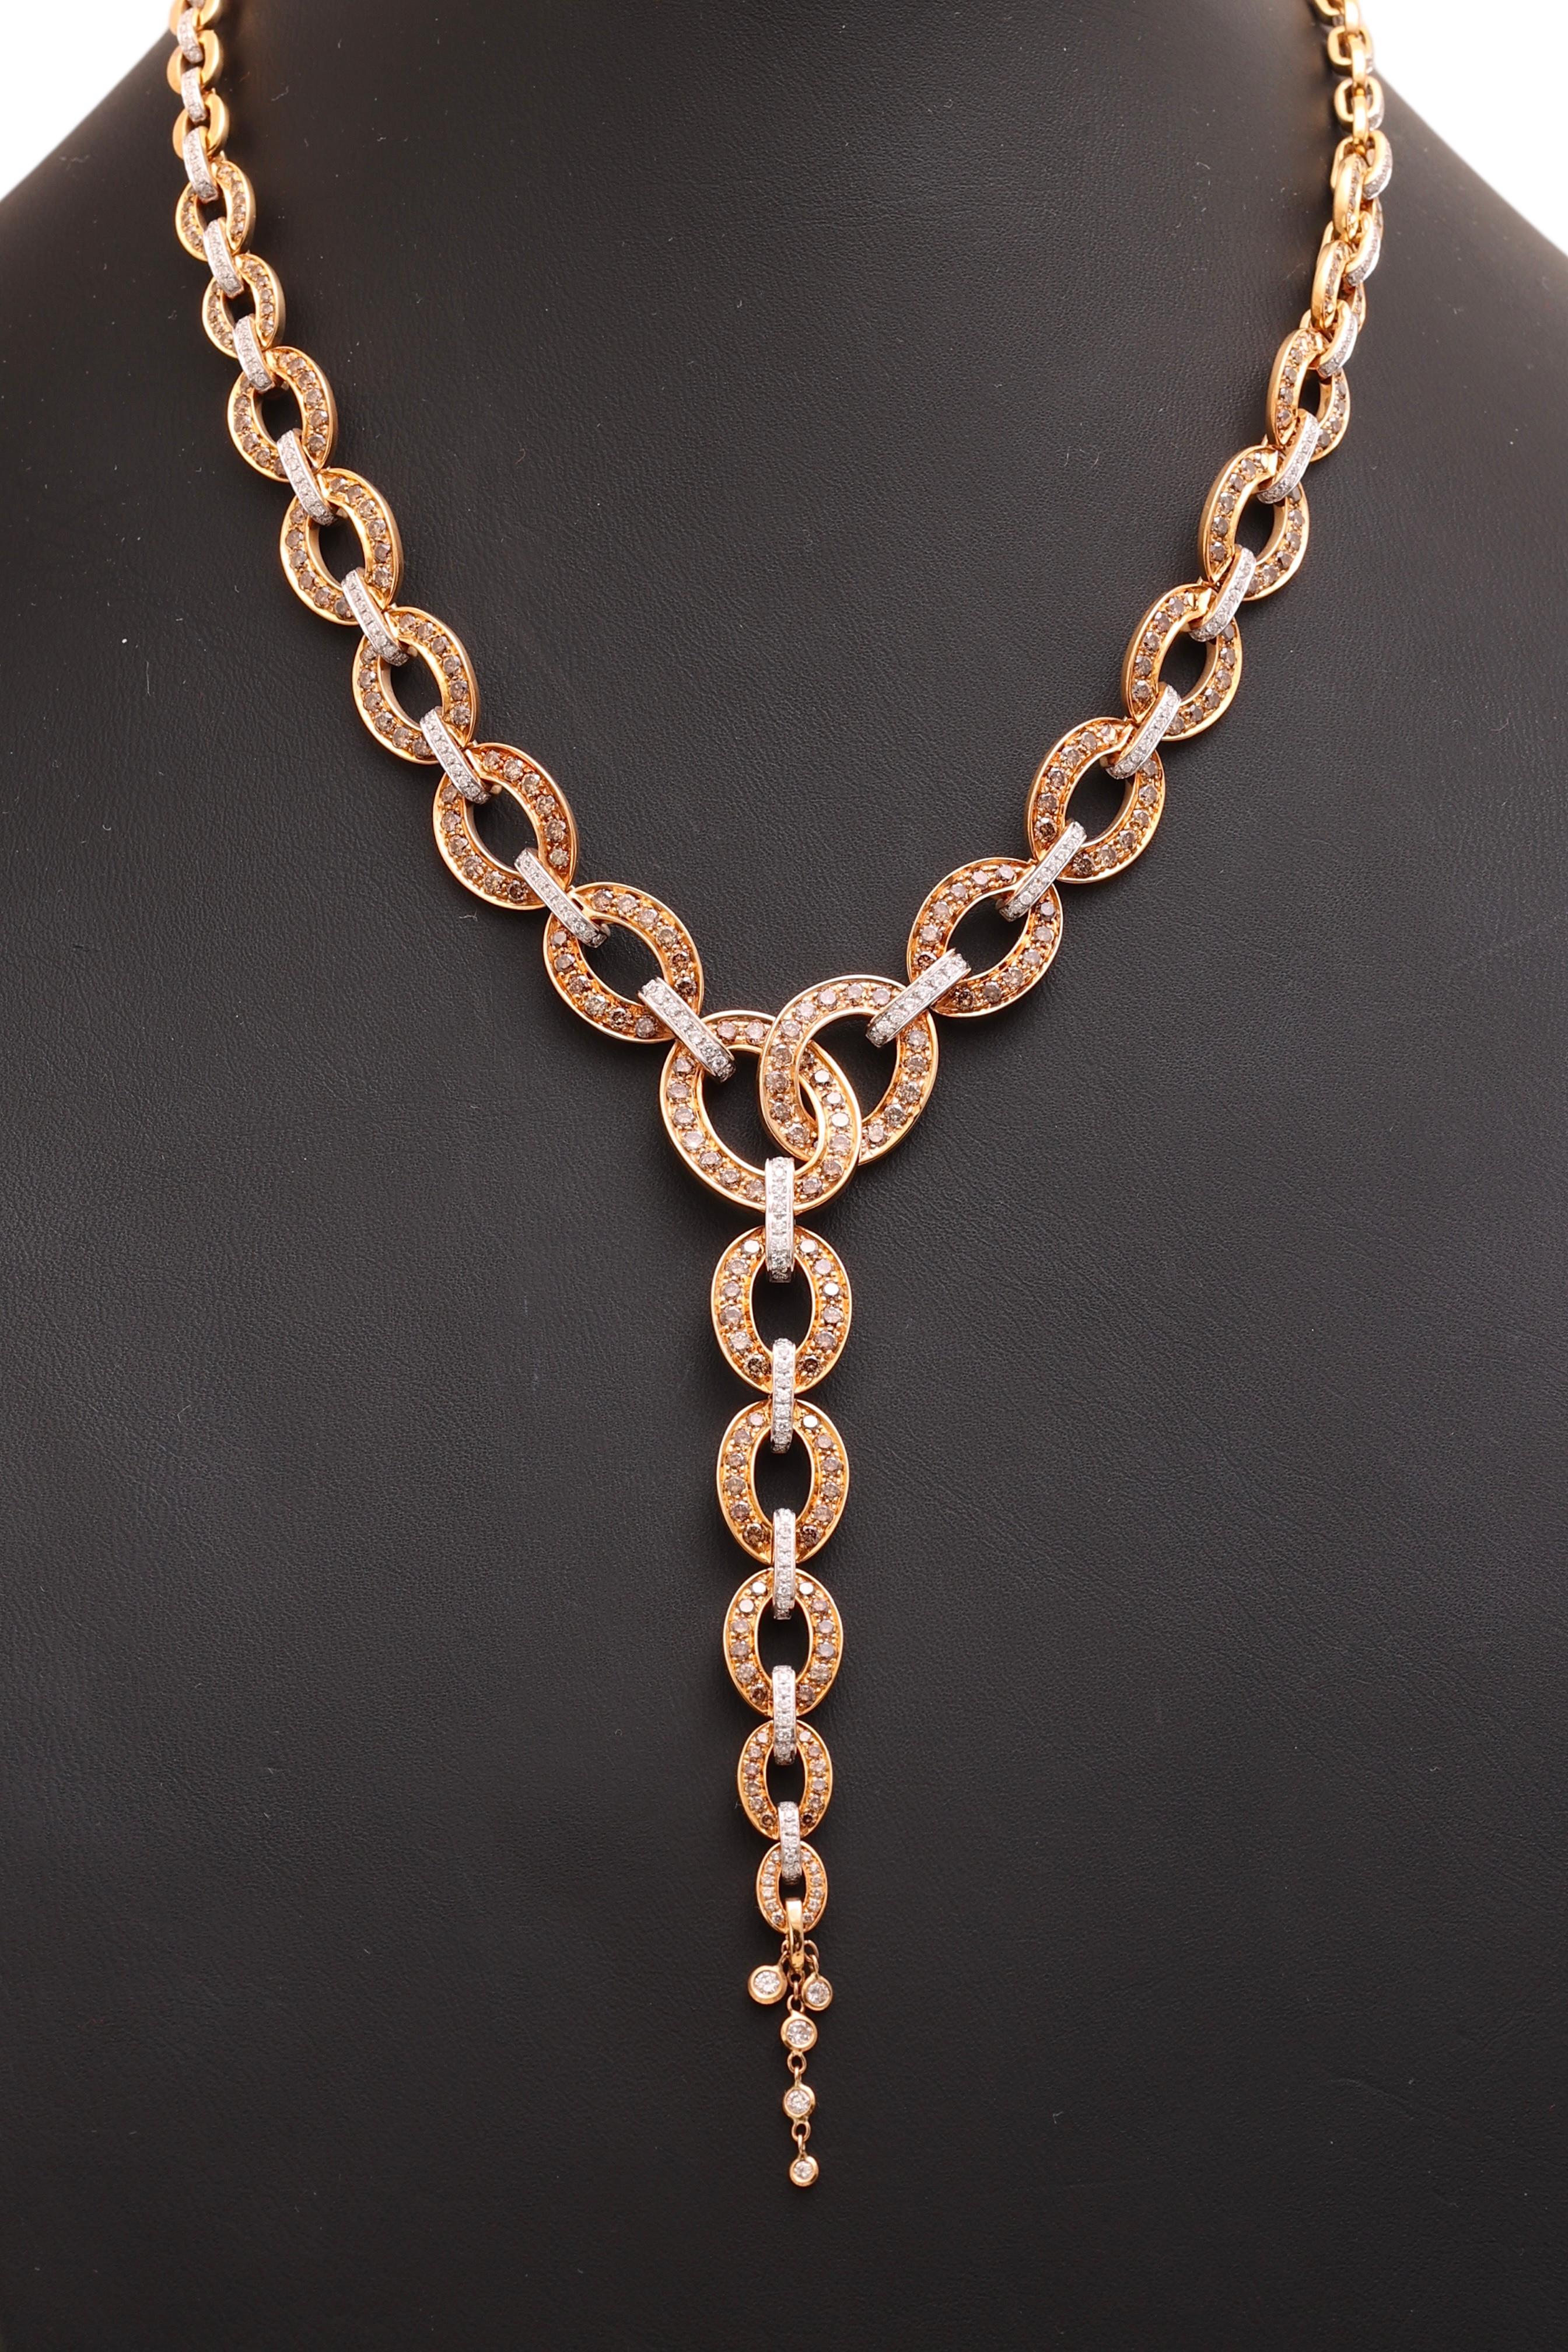 Artisan 18 kt. Pink & White Gold SET Necklace & Earrings Cognac & White 9.44 Ct Diamonds For Sale